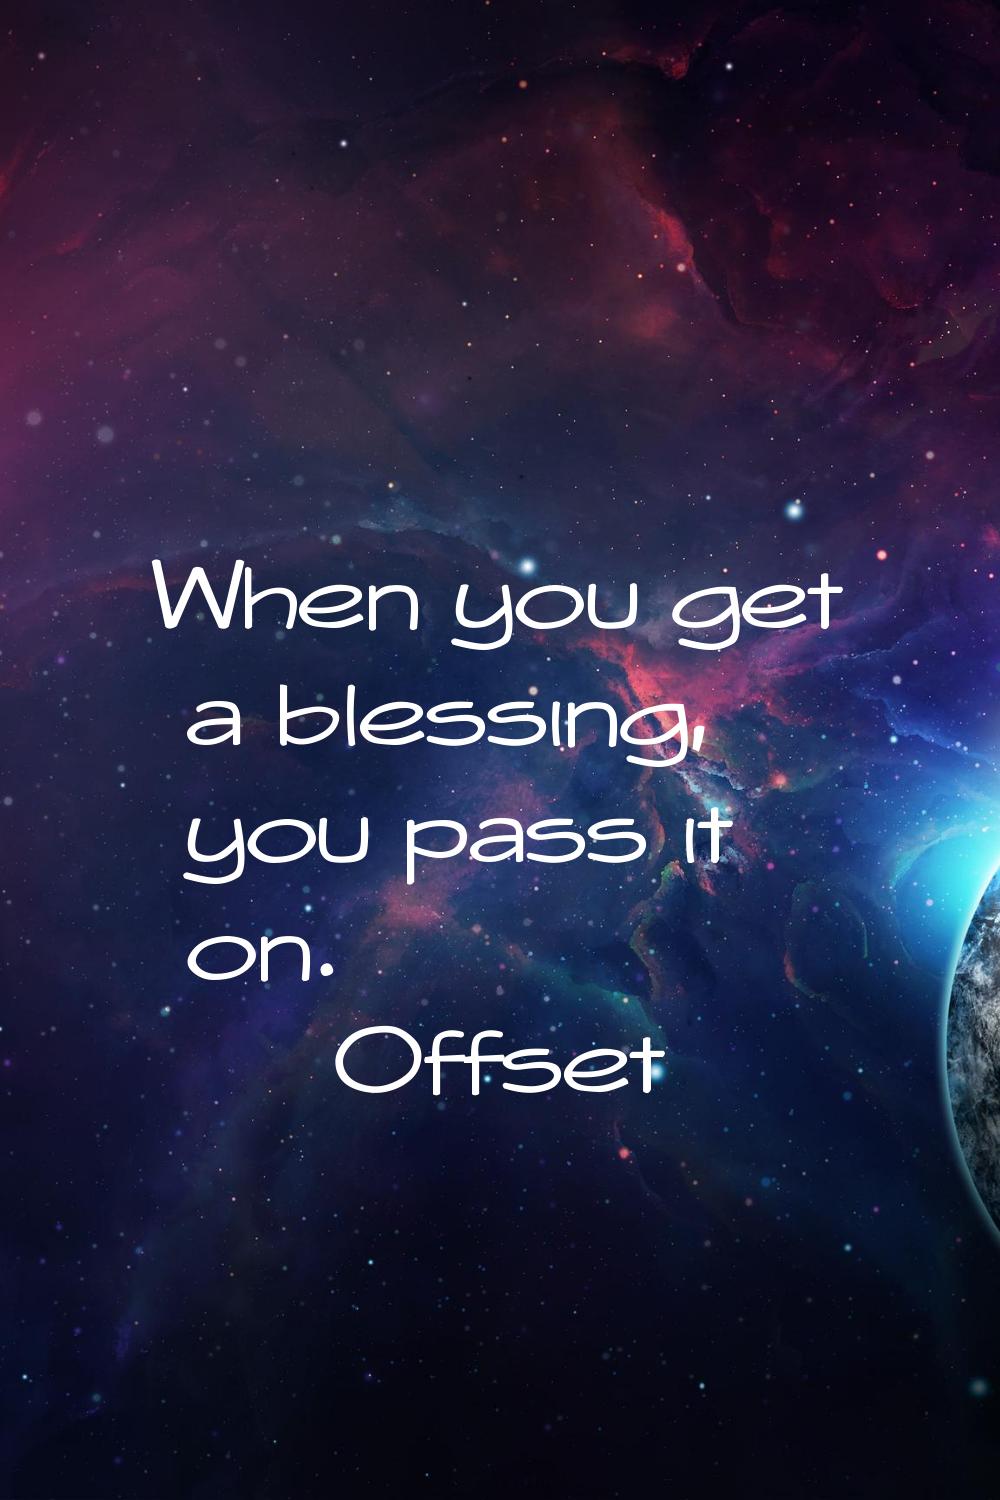 When you get a blessing, you pass it on.